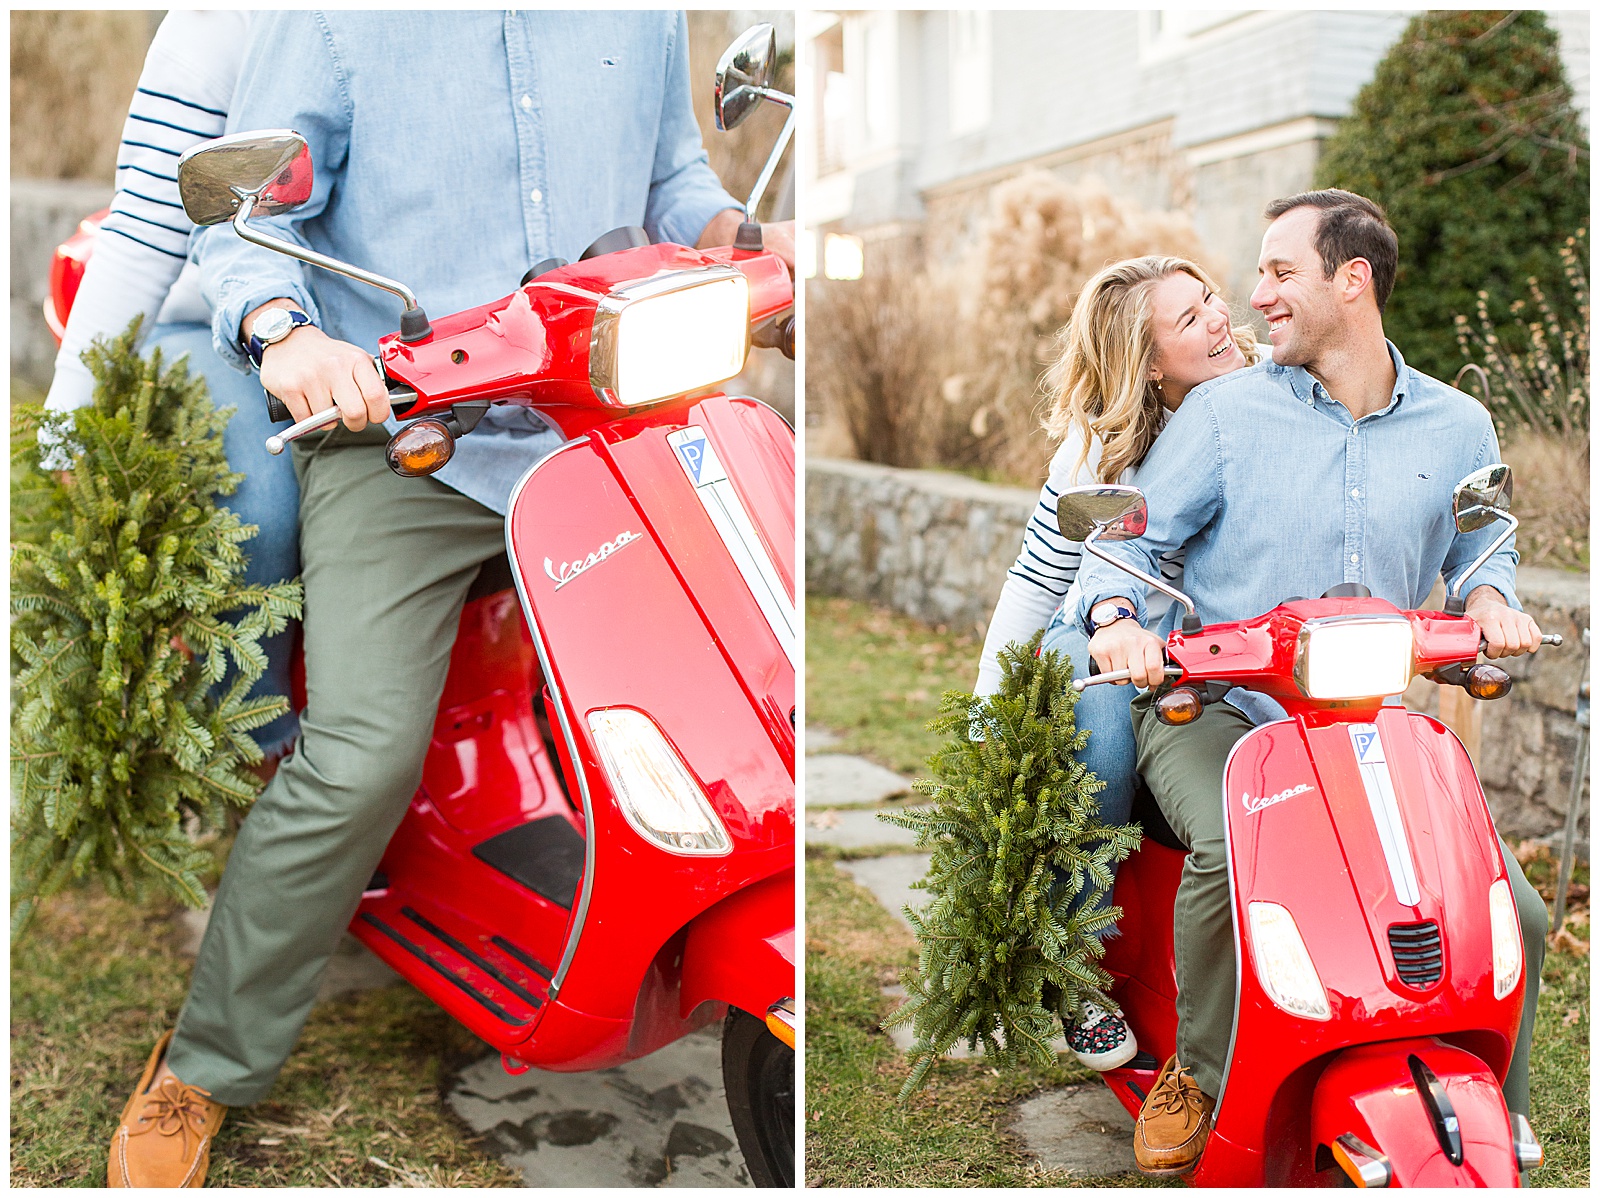 Red Vespa engagement photos for the holidays in CT